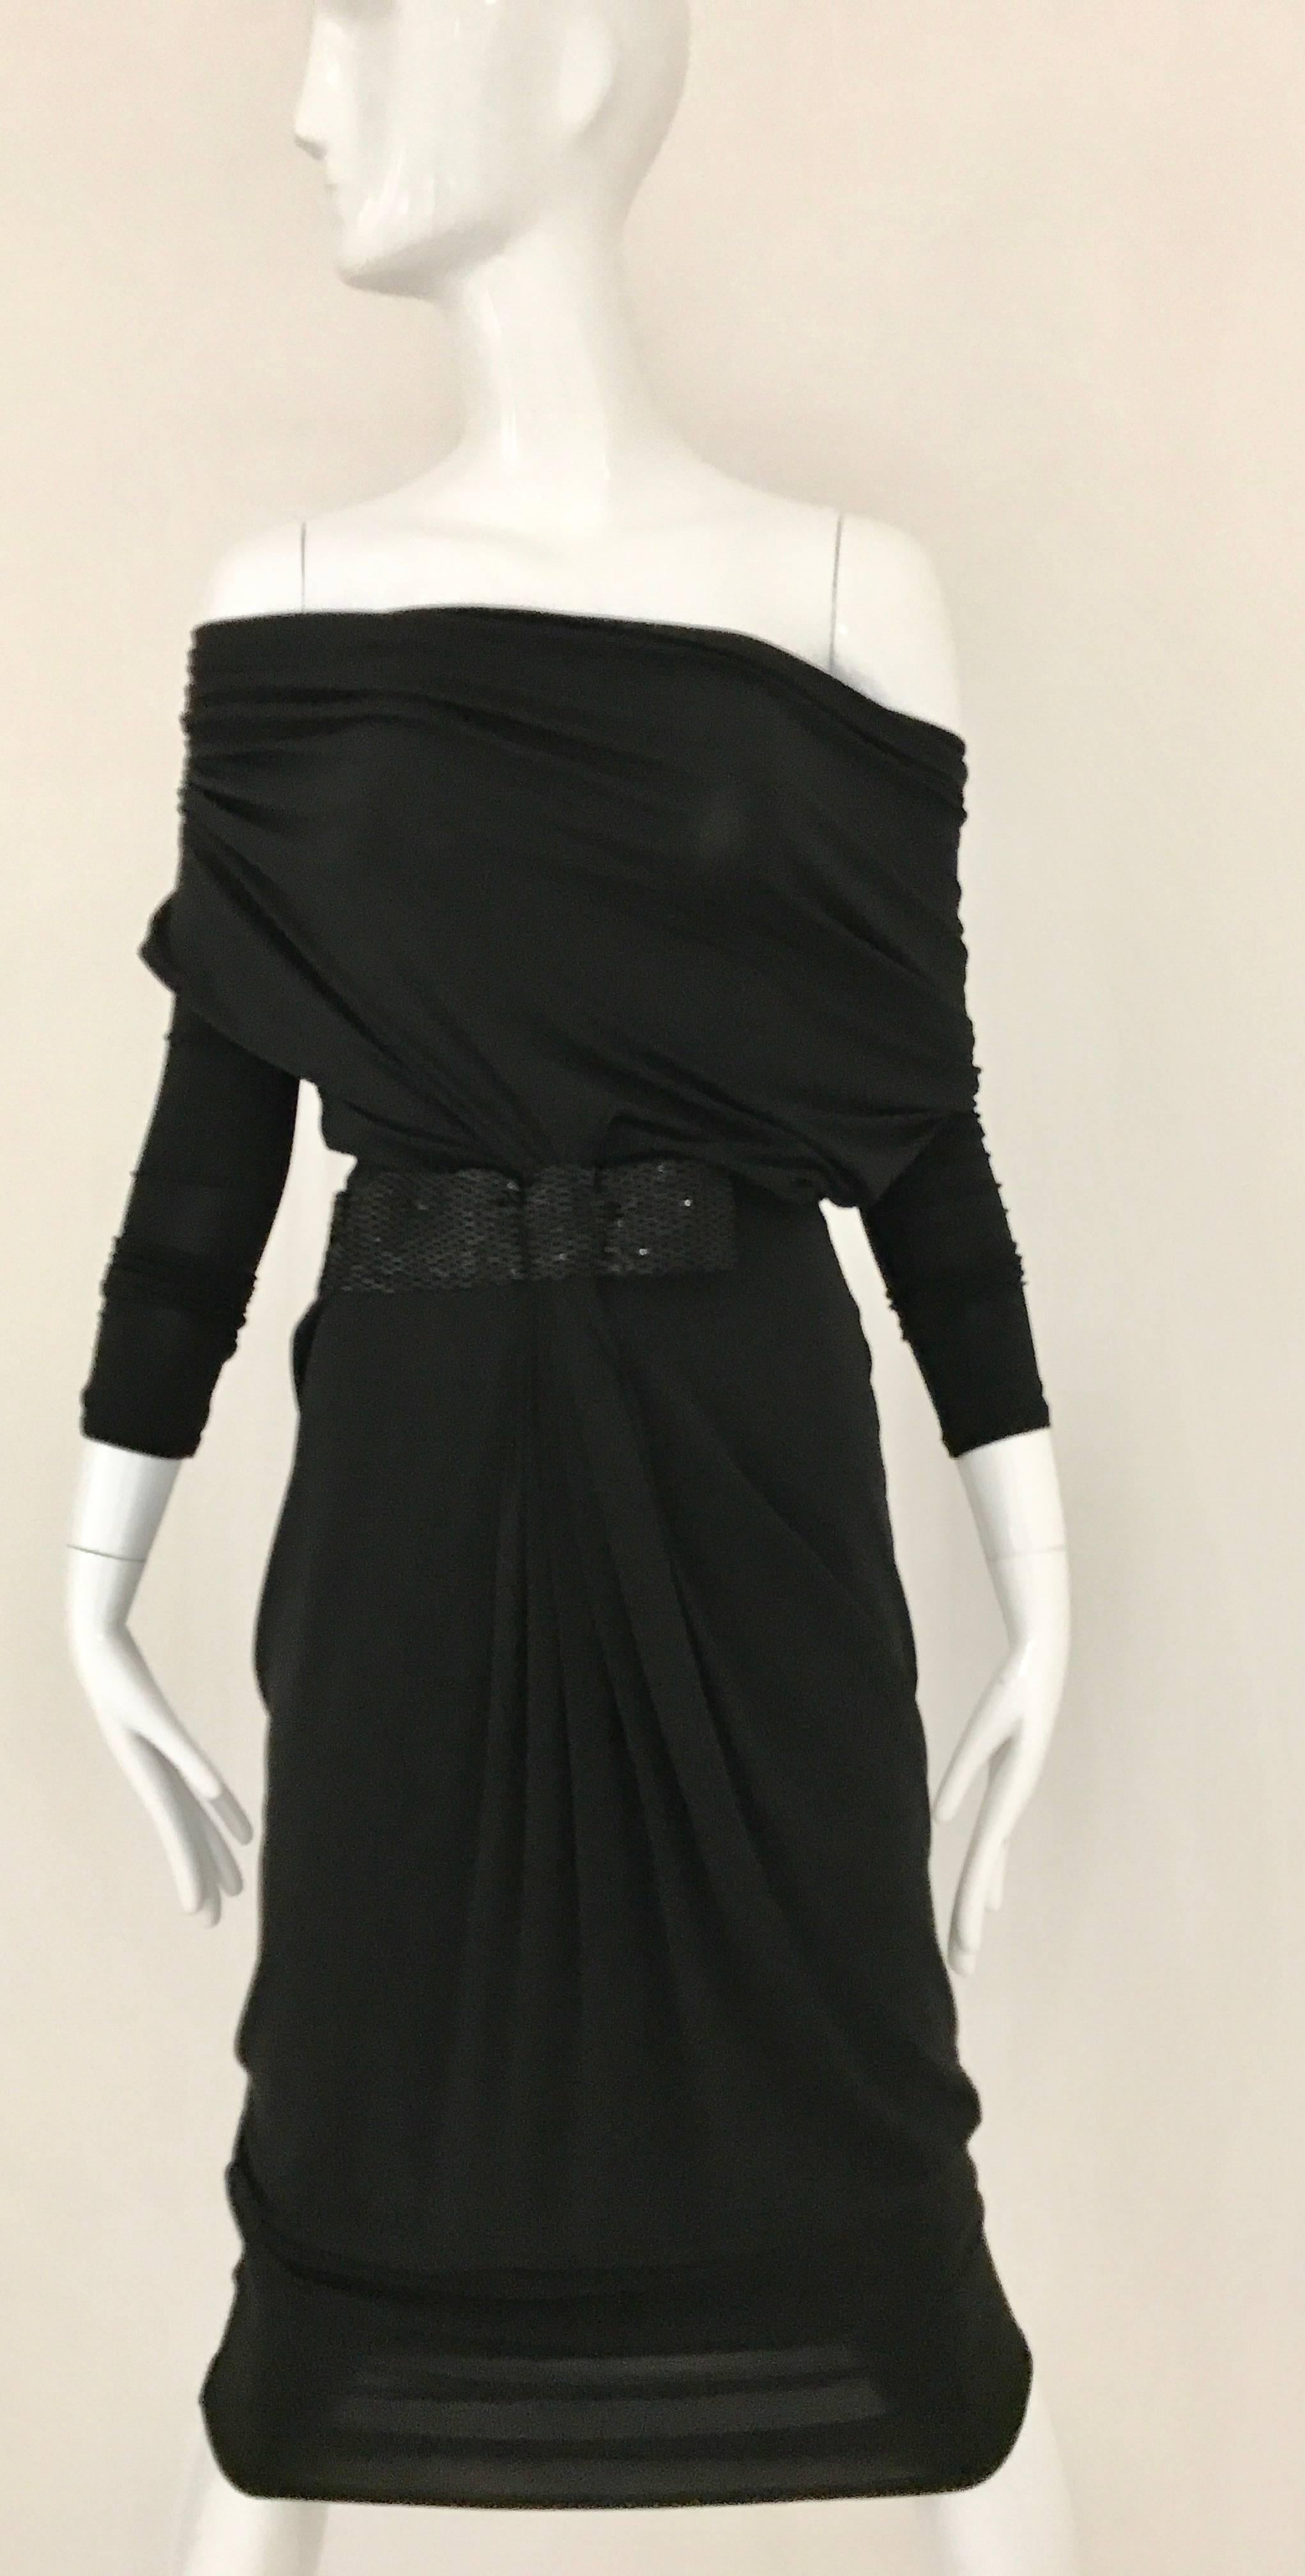 Sexy  Vintage 1990s Gianfranco Ferre Black Viscose long sleeve dress. Plunging Cowl neckline with black buggle beads waist band. Dress can be worn off shoulder.
Fit best for size US 2 or 4
Bust: 36 inch  / Waist: 26 - 28 inch/ Hip: 36 inch/ Dress